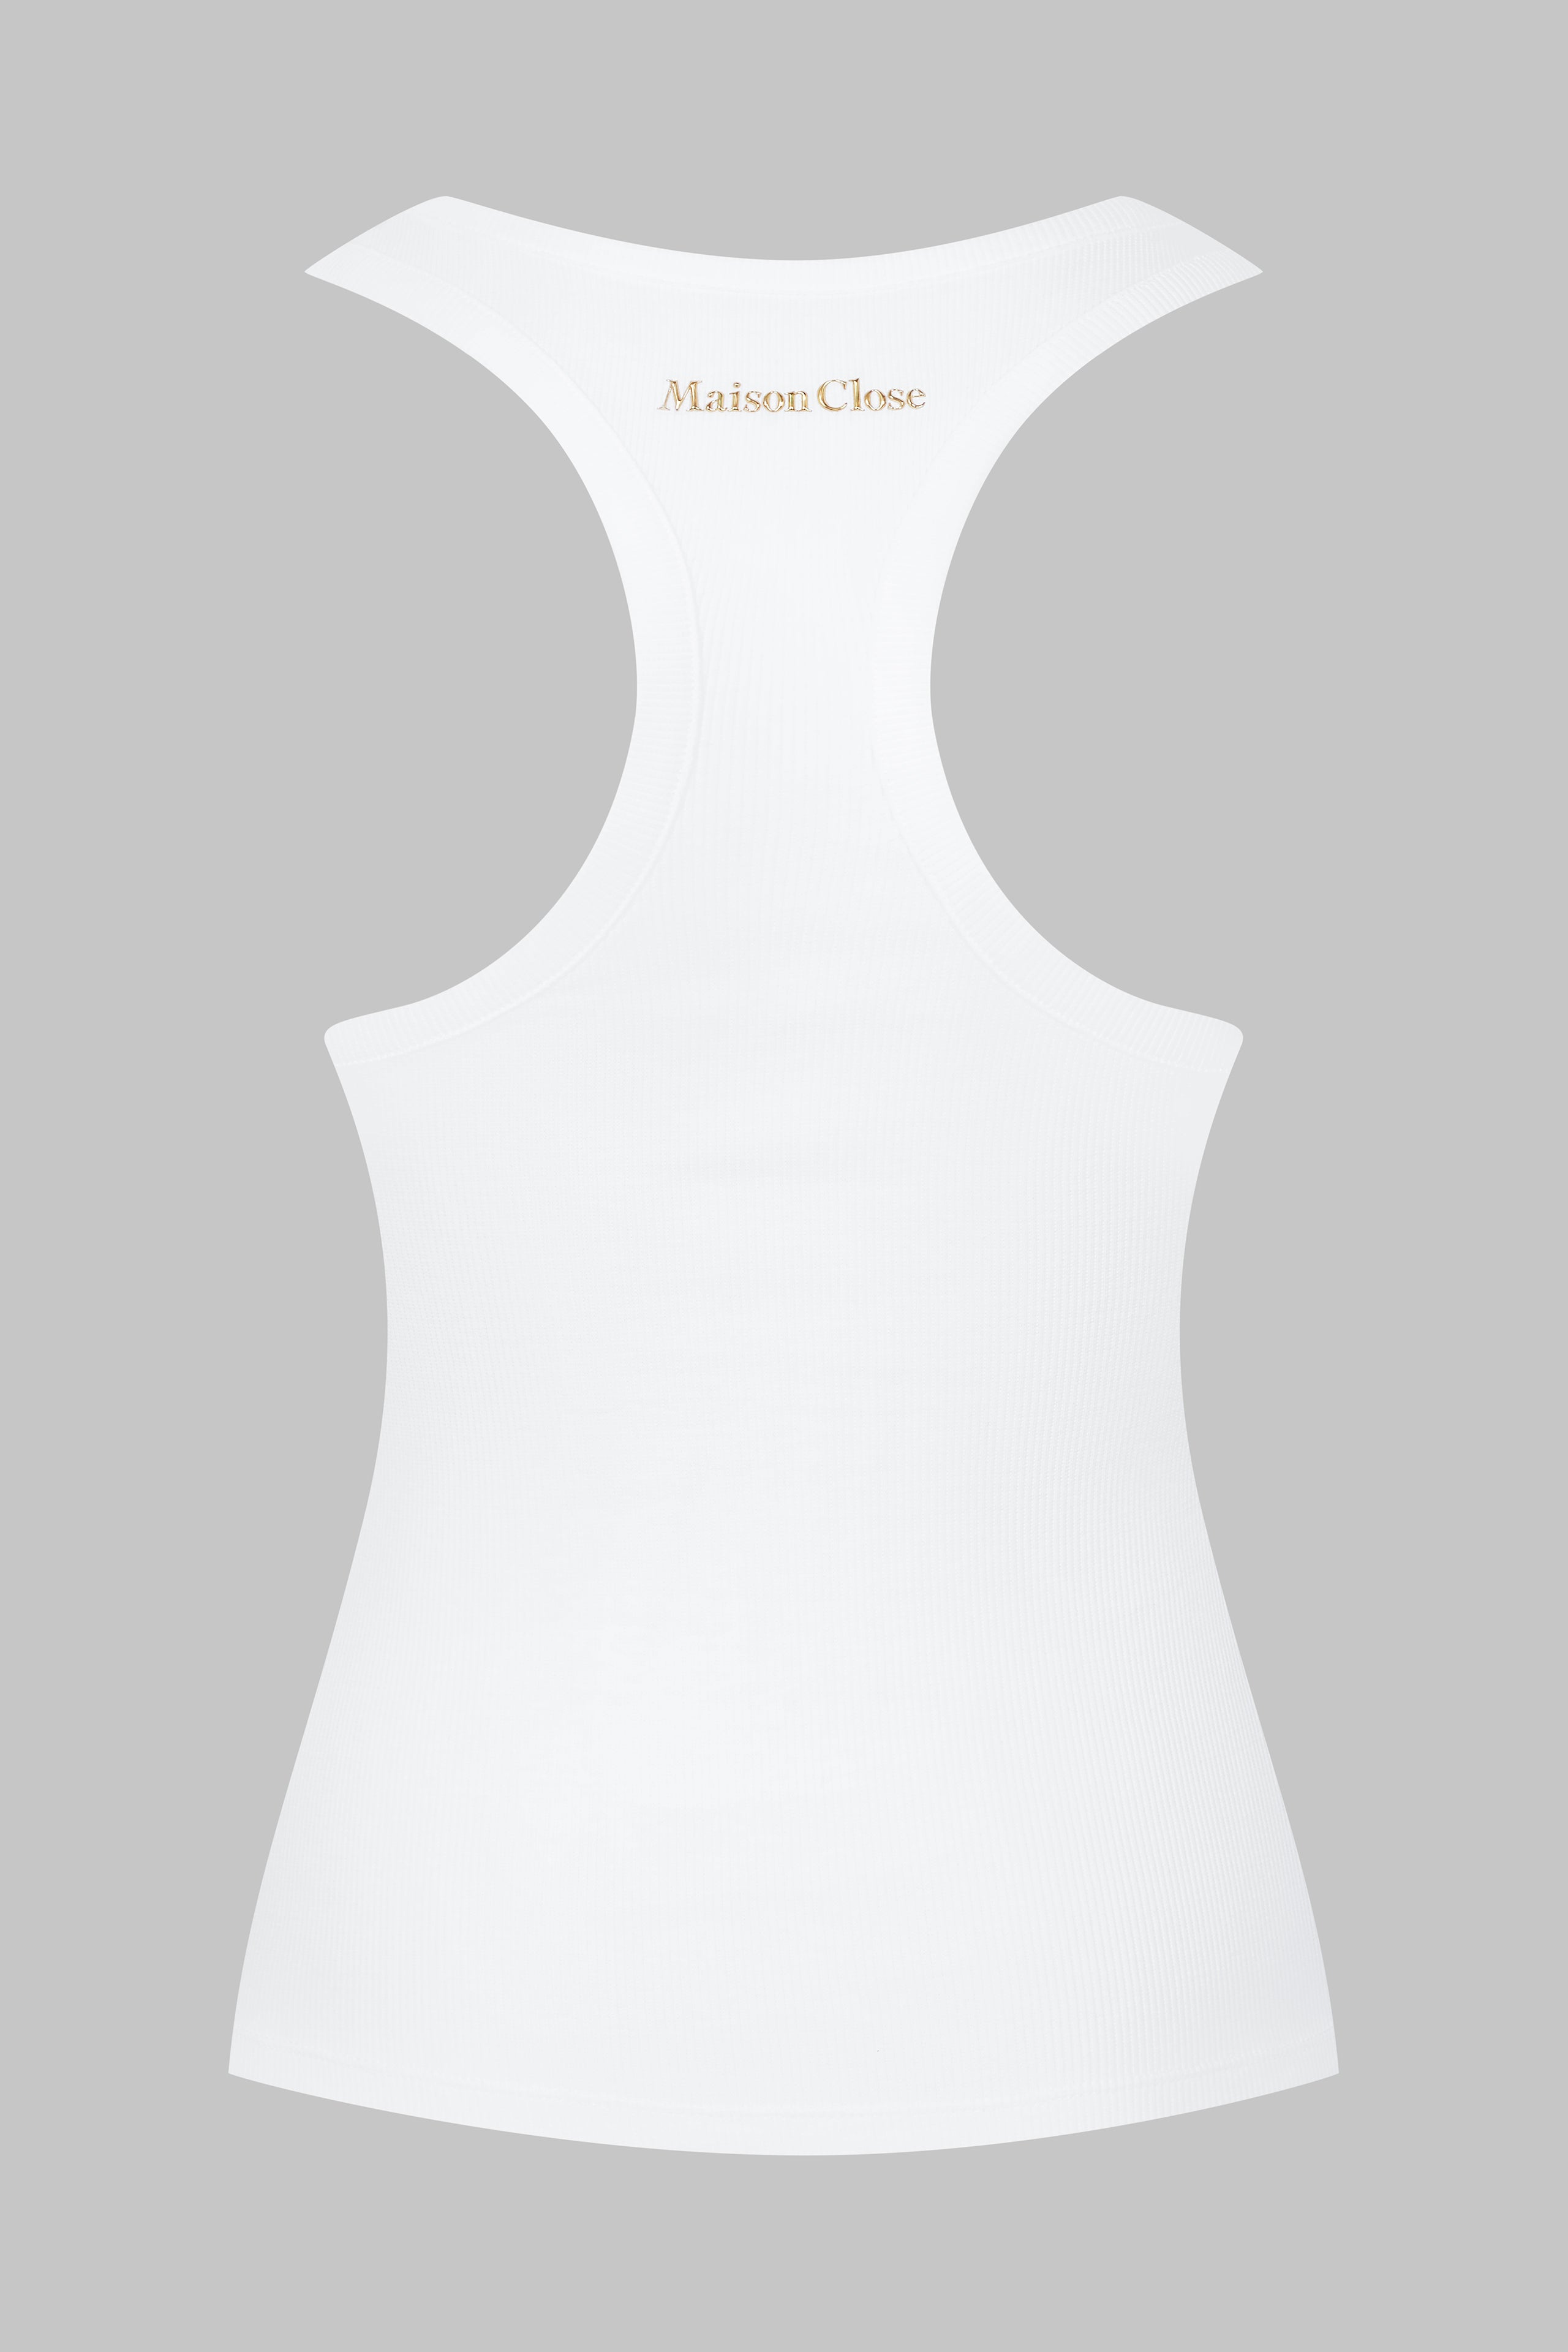 012 - Cotton tank top with gold logo